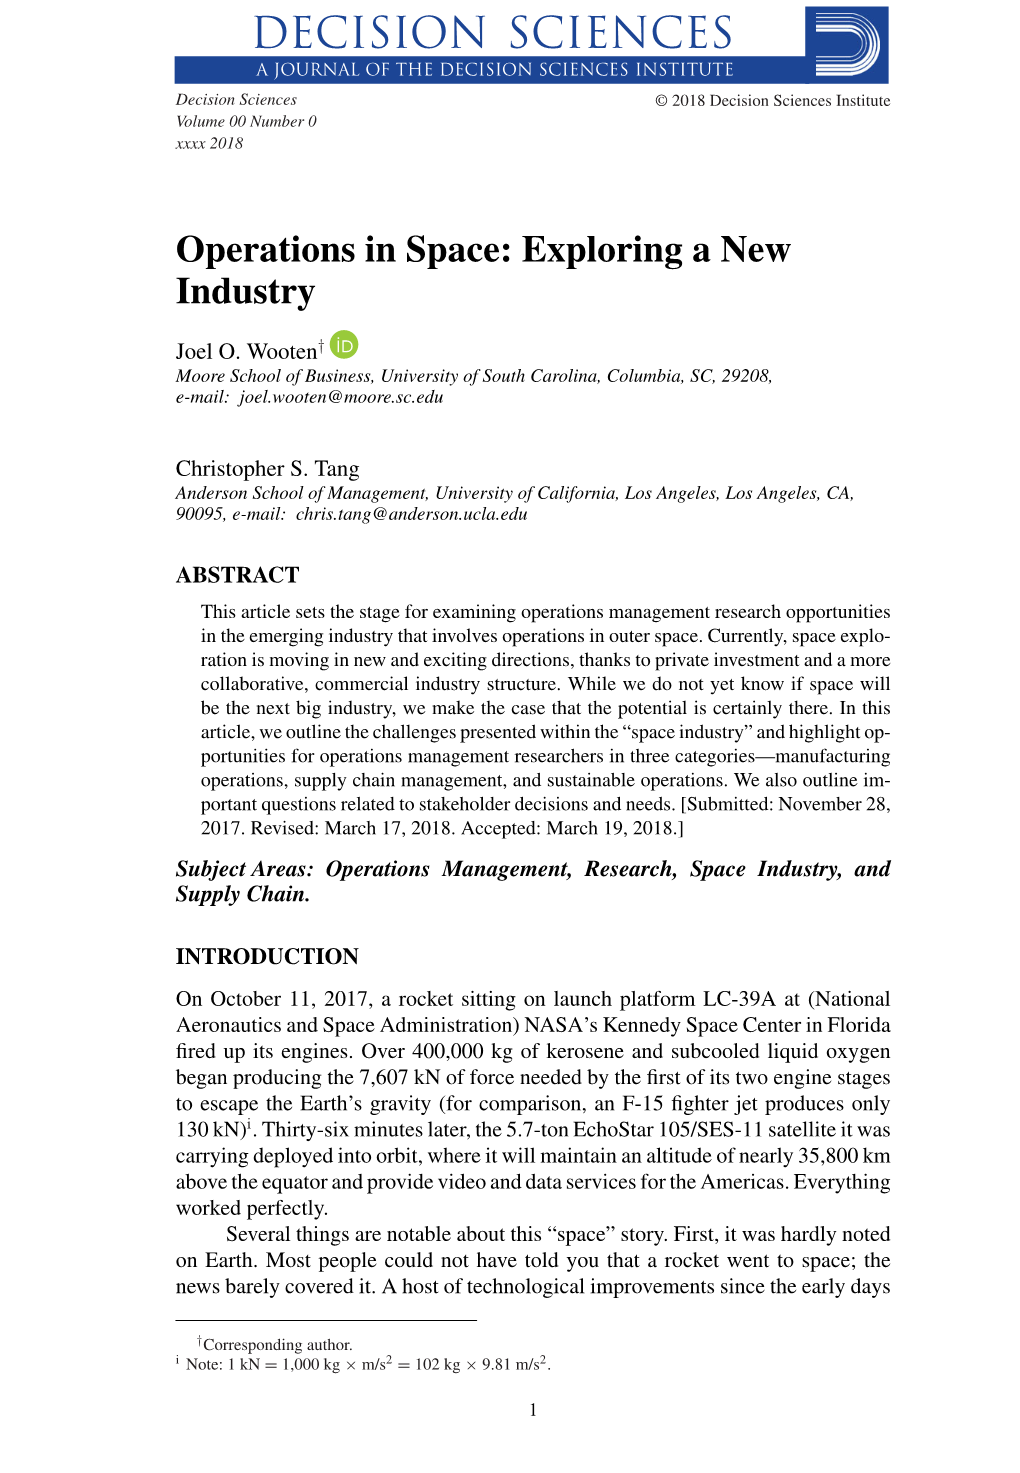 Operations in Space: Exploring a New Industry